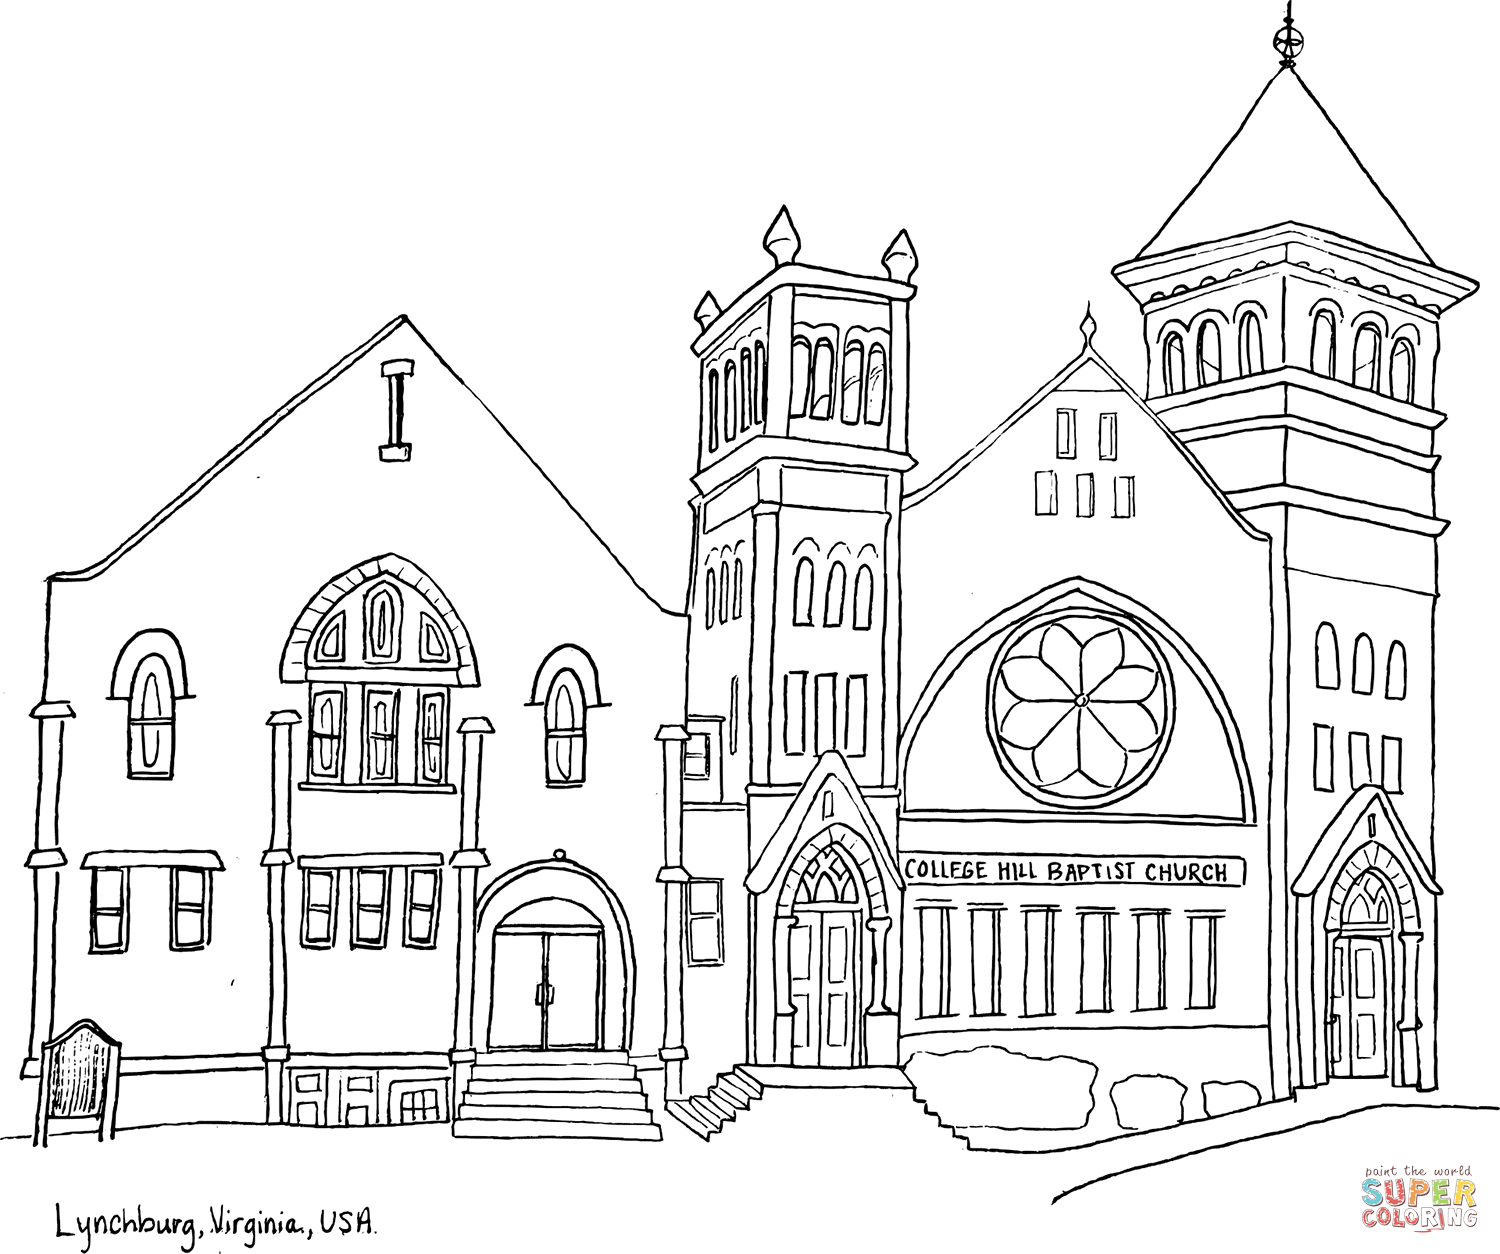 Building Coloring Page Coloring Ideas Building Coloring Sheets College Hill Baptist